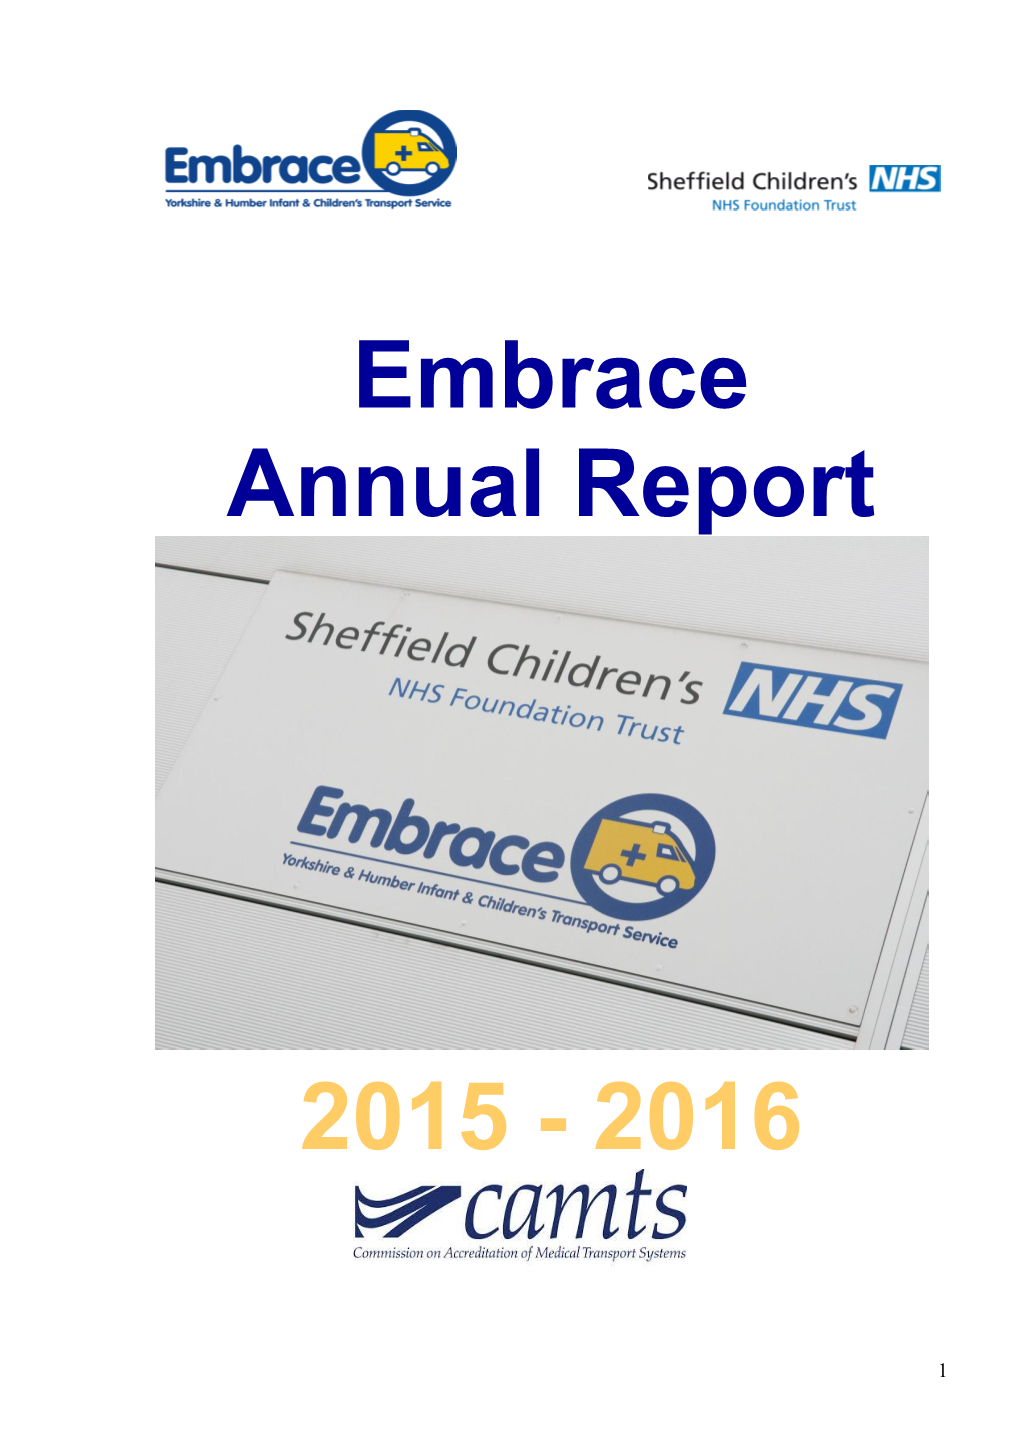 Embrace Annual Report 2015